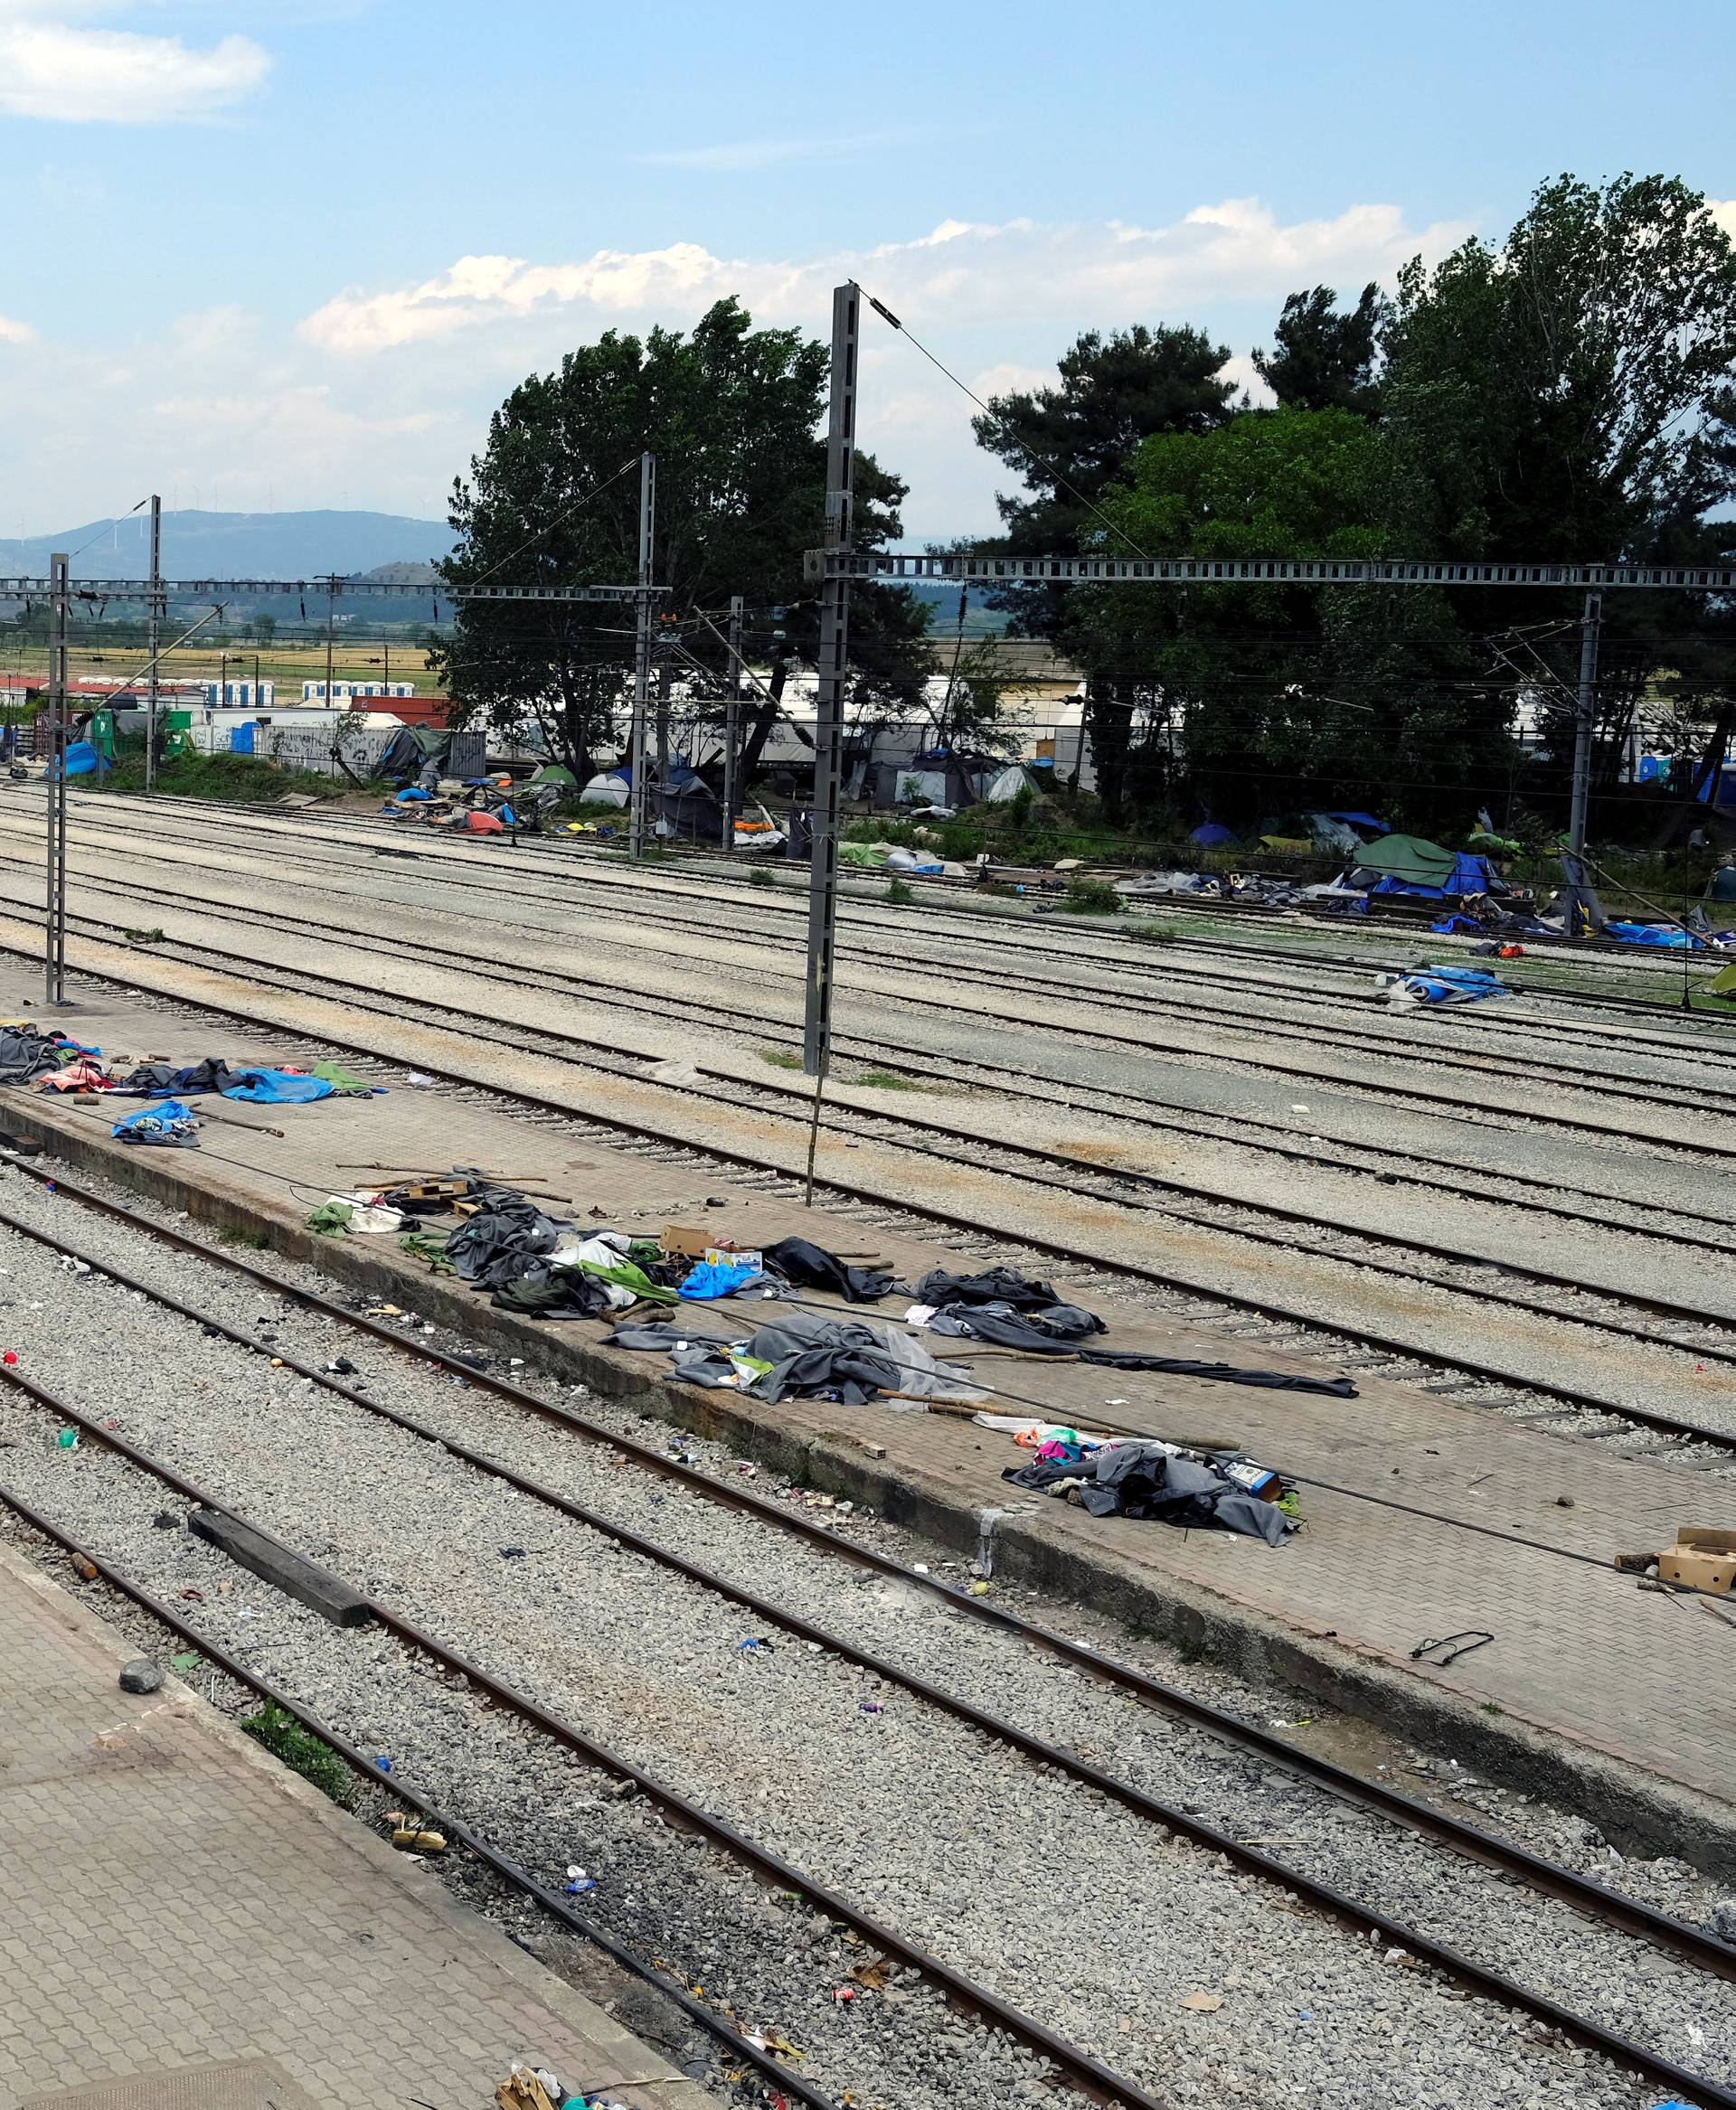 The train station where migrants used to stay is seen during a police operation to evacuate a migrants' makeshift camp at the Greek-Macedonian border near the village of Idomeni